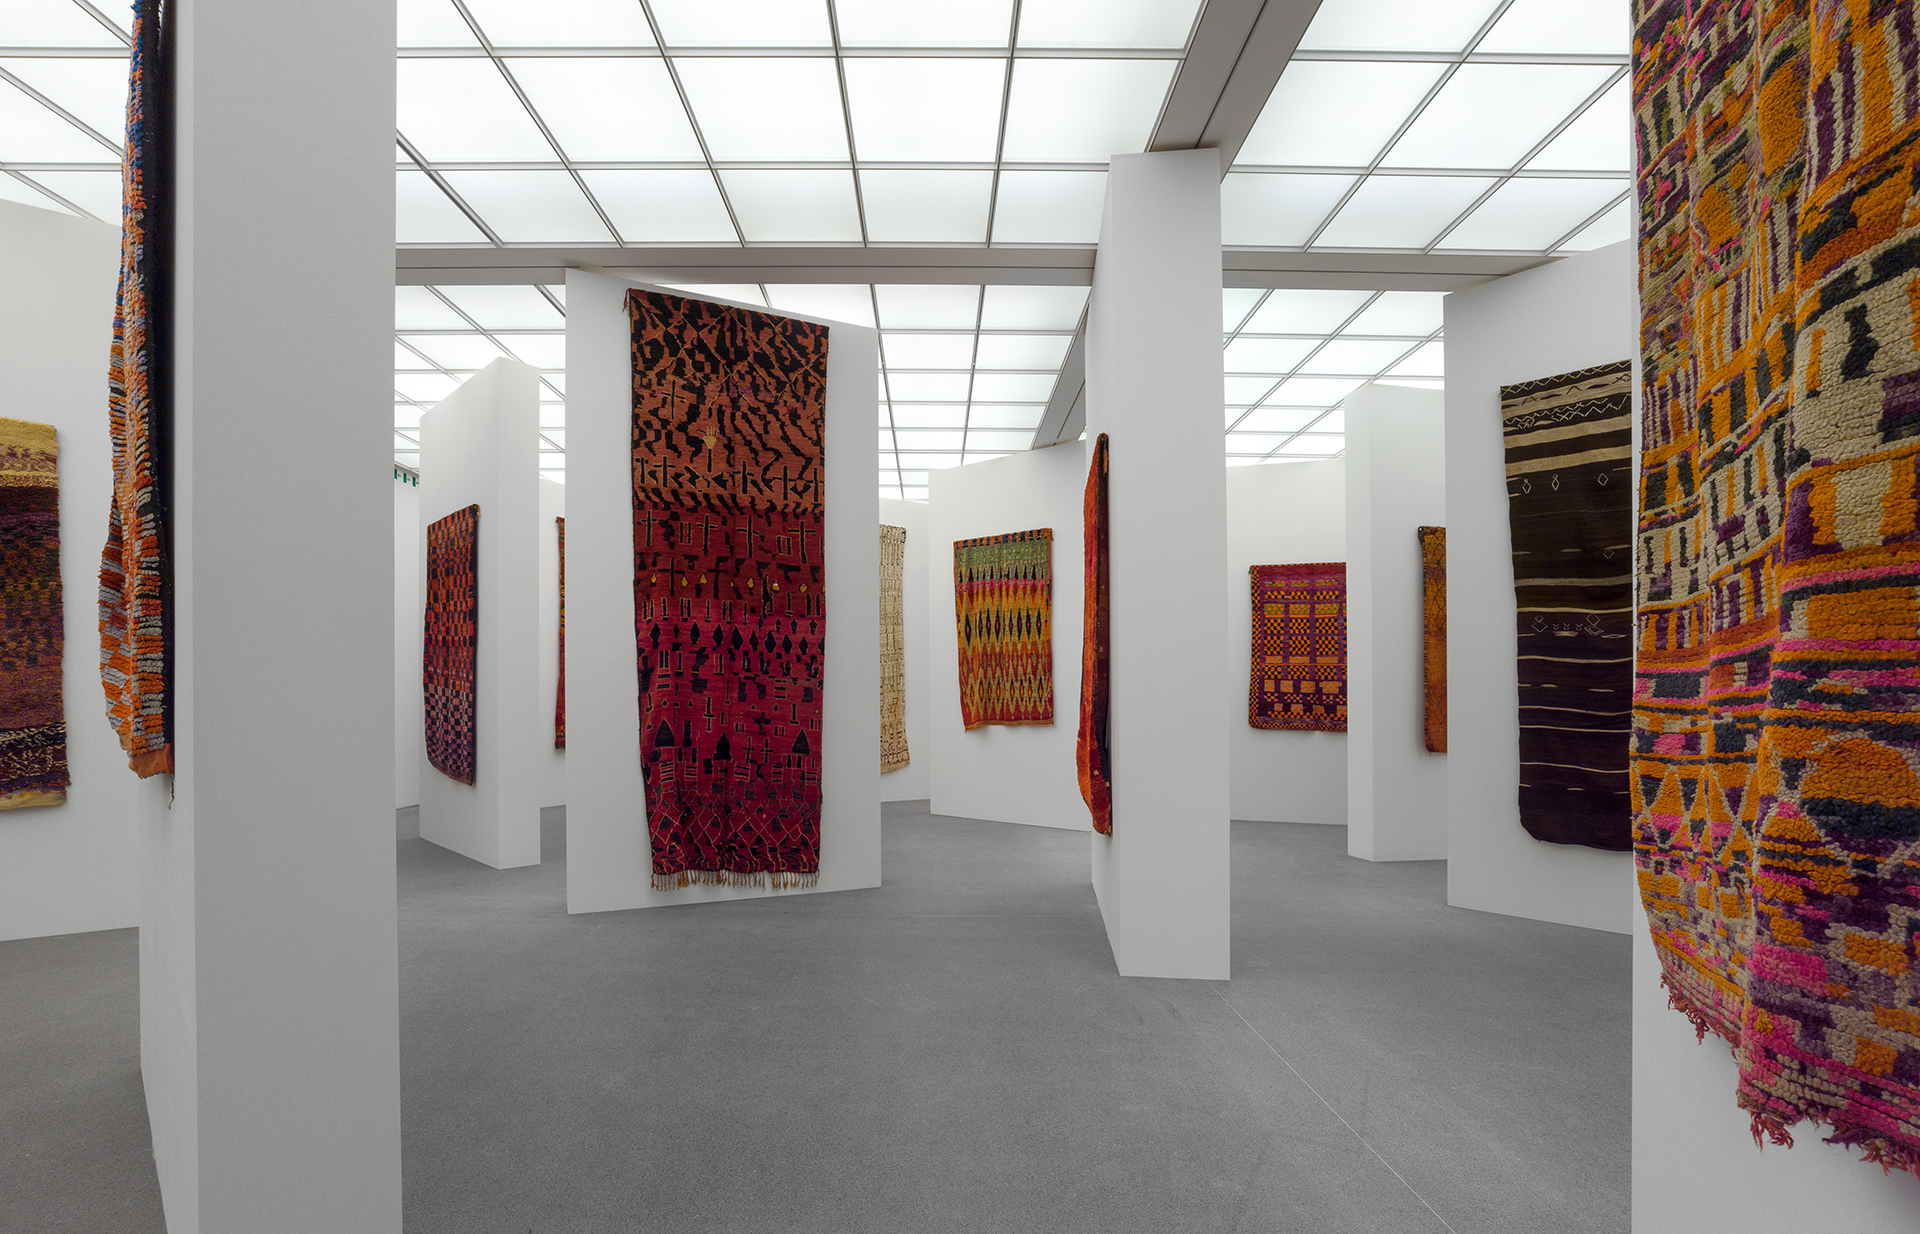 Exhibition room with walls spread out and artfully woven carpets hanging from them.